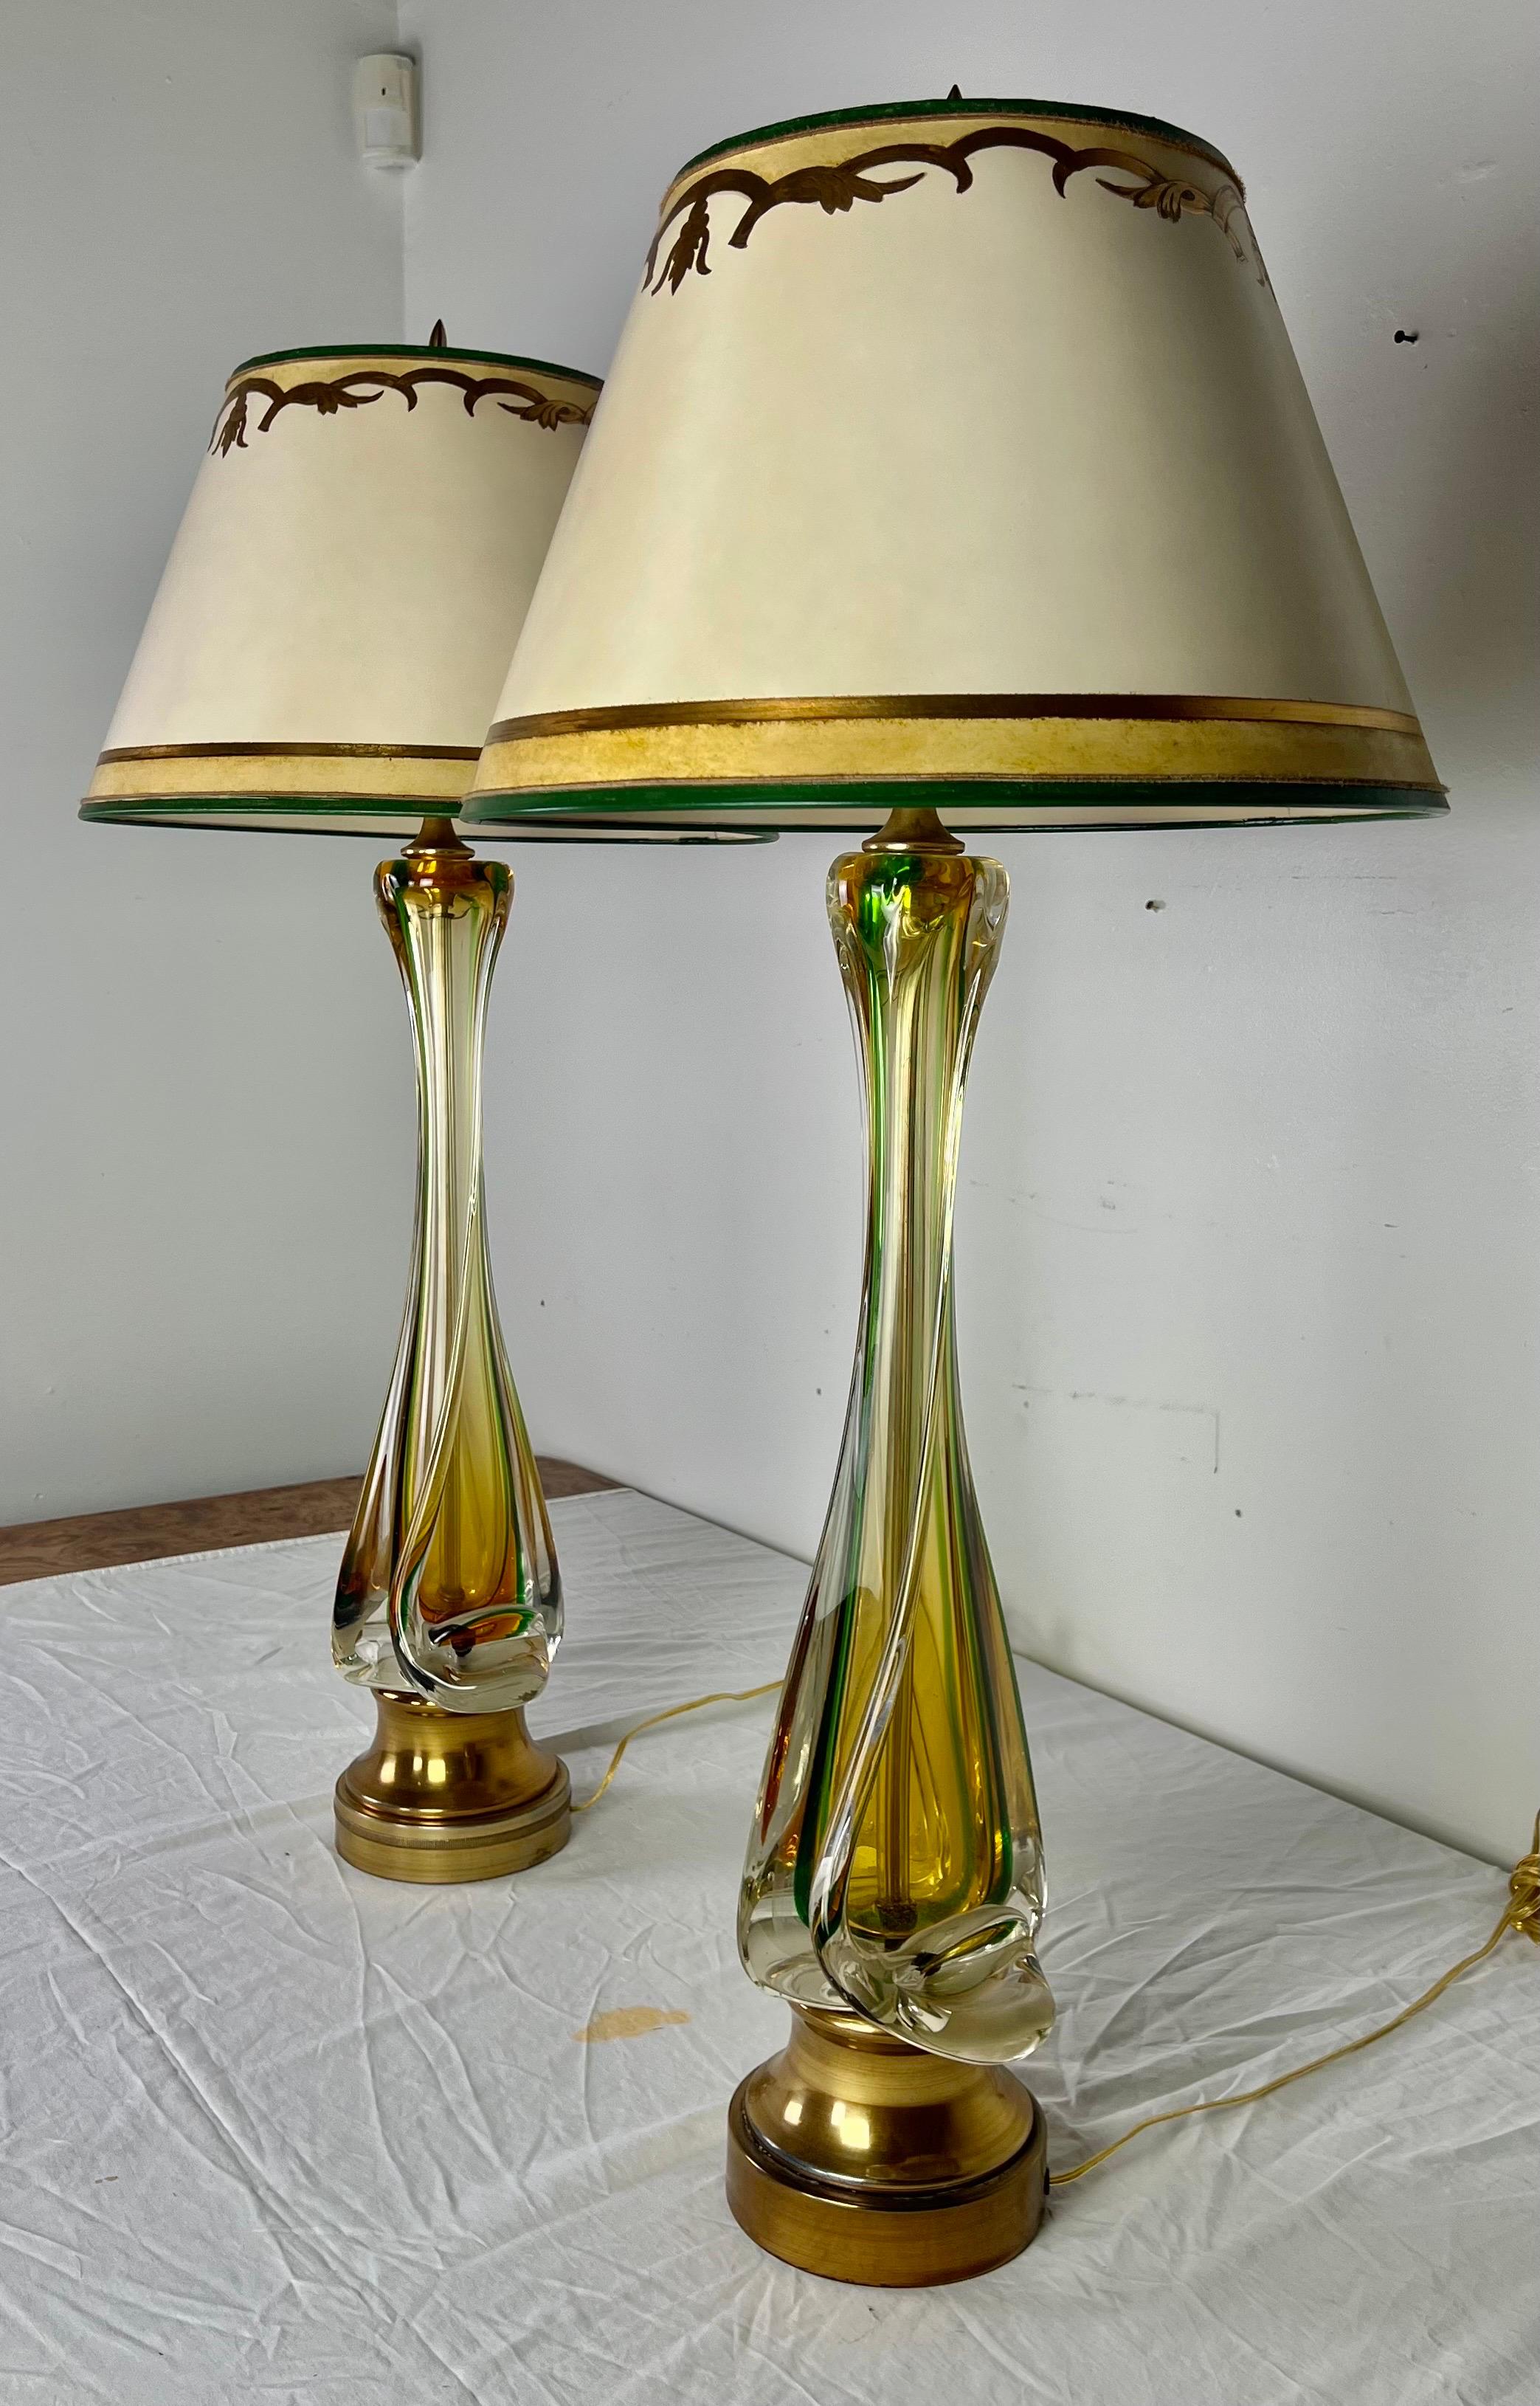 20th Century Italian Art Glass Lamps with Parchment Shades, Pair For Sale 4